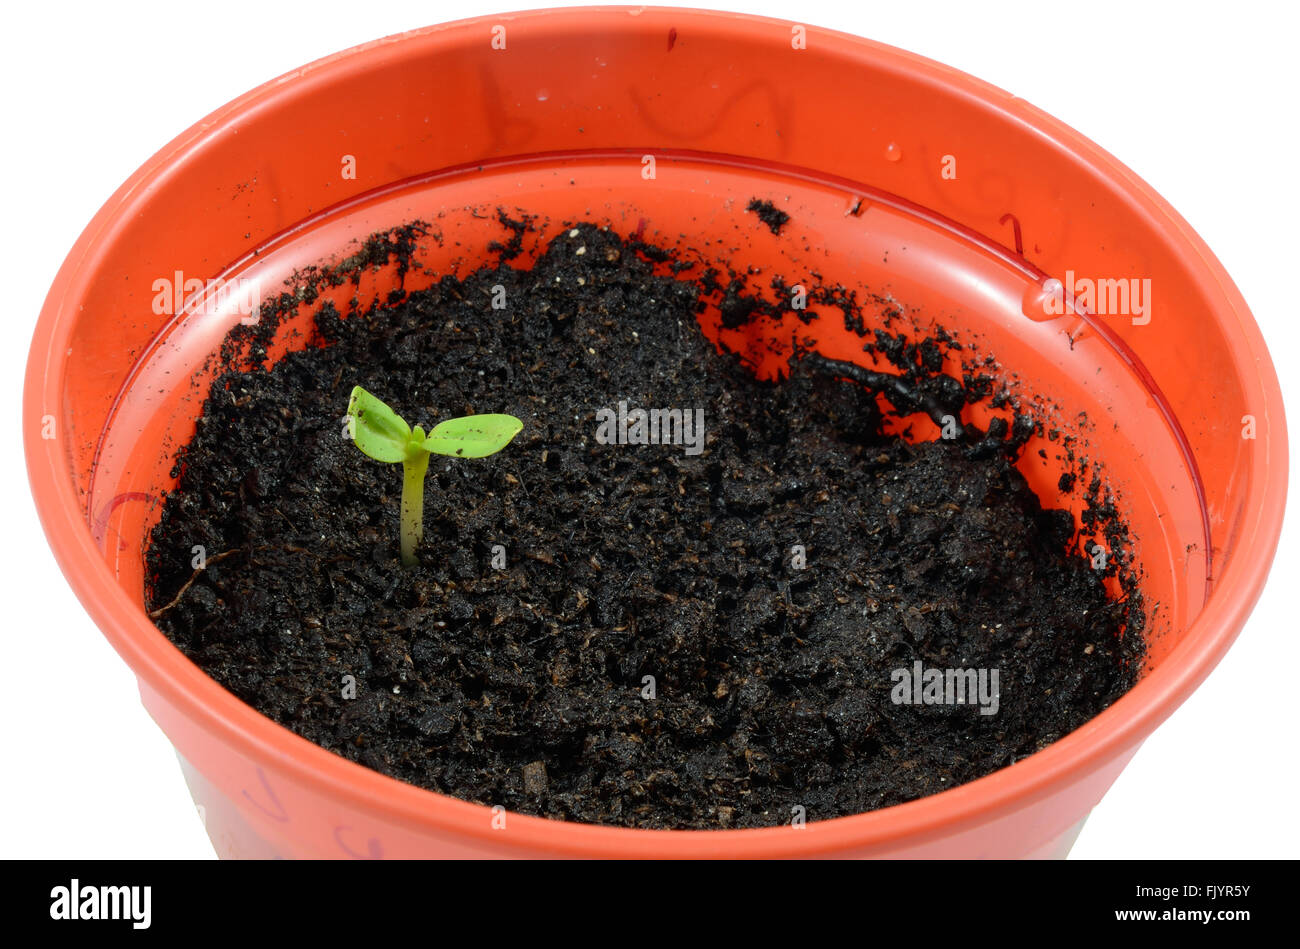 A seedling growing in a plant pot full of compost. Stock Photo